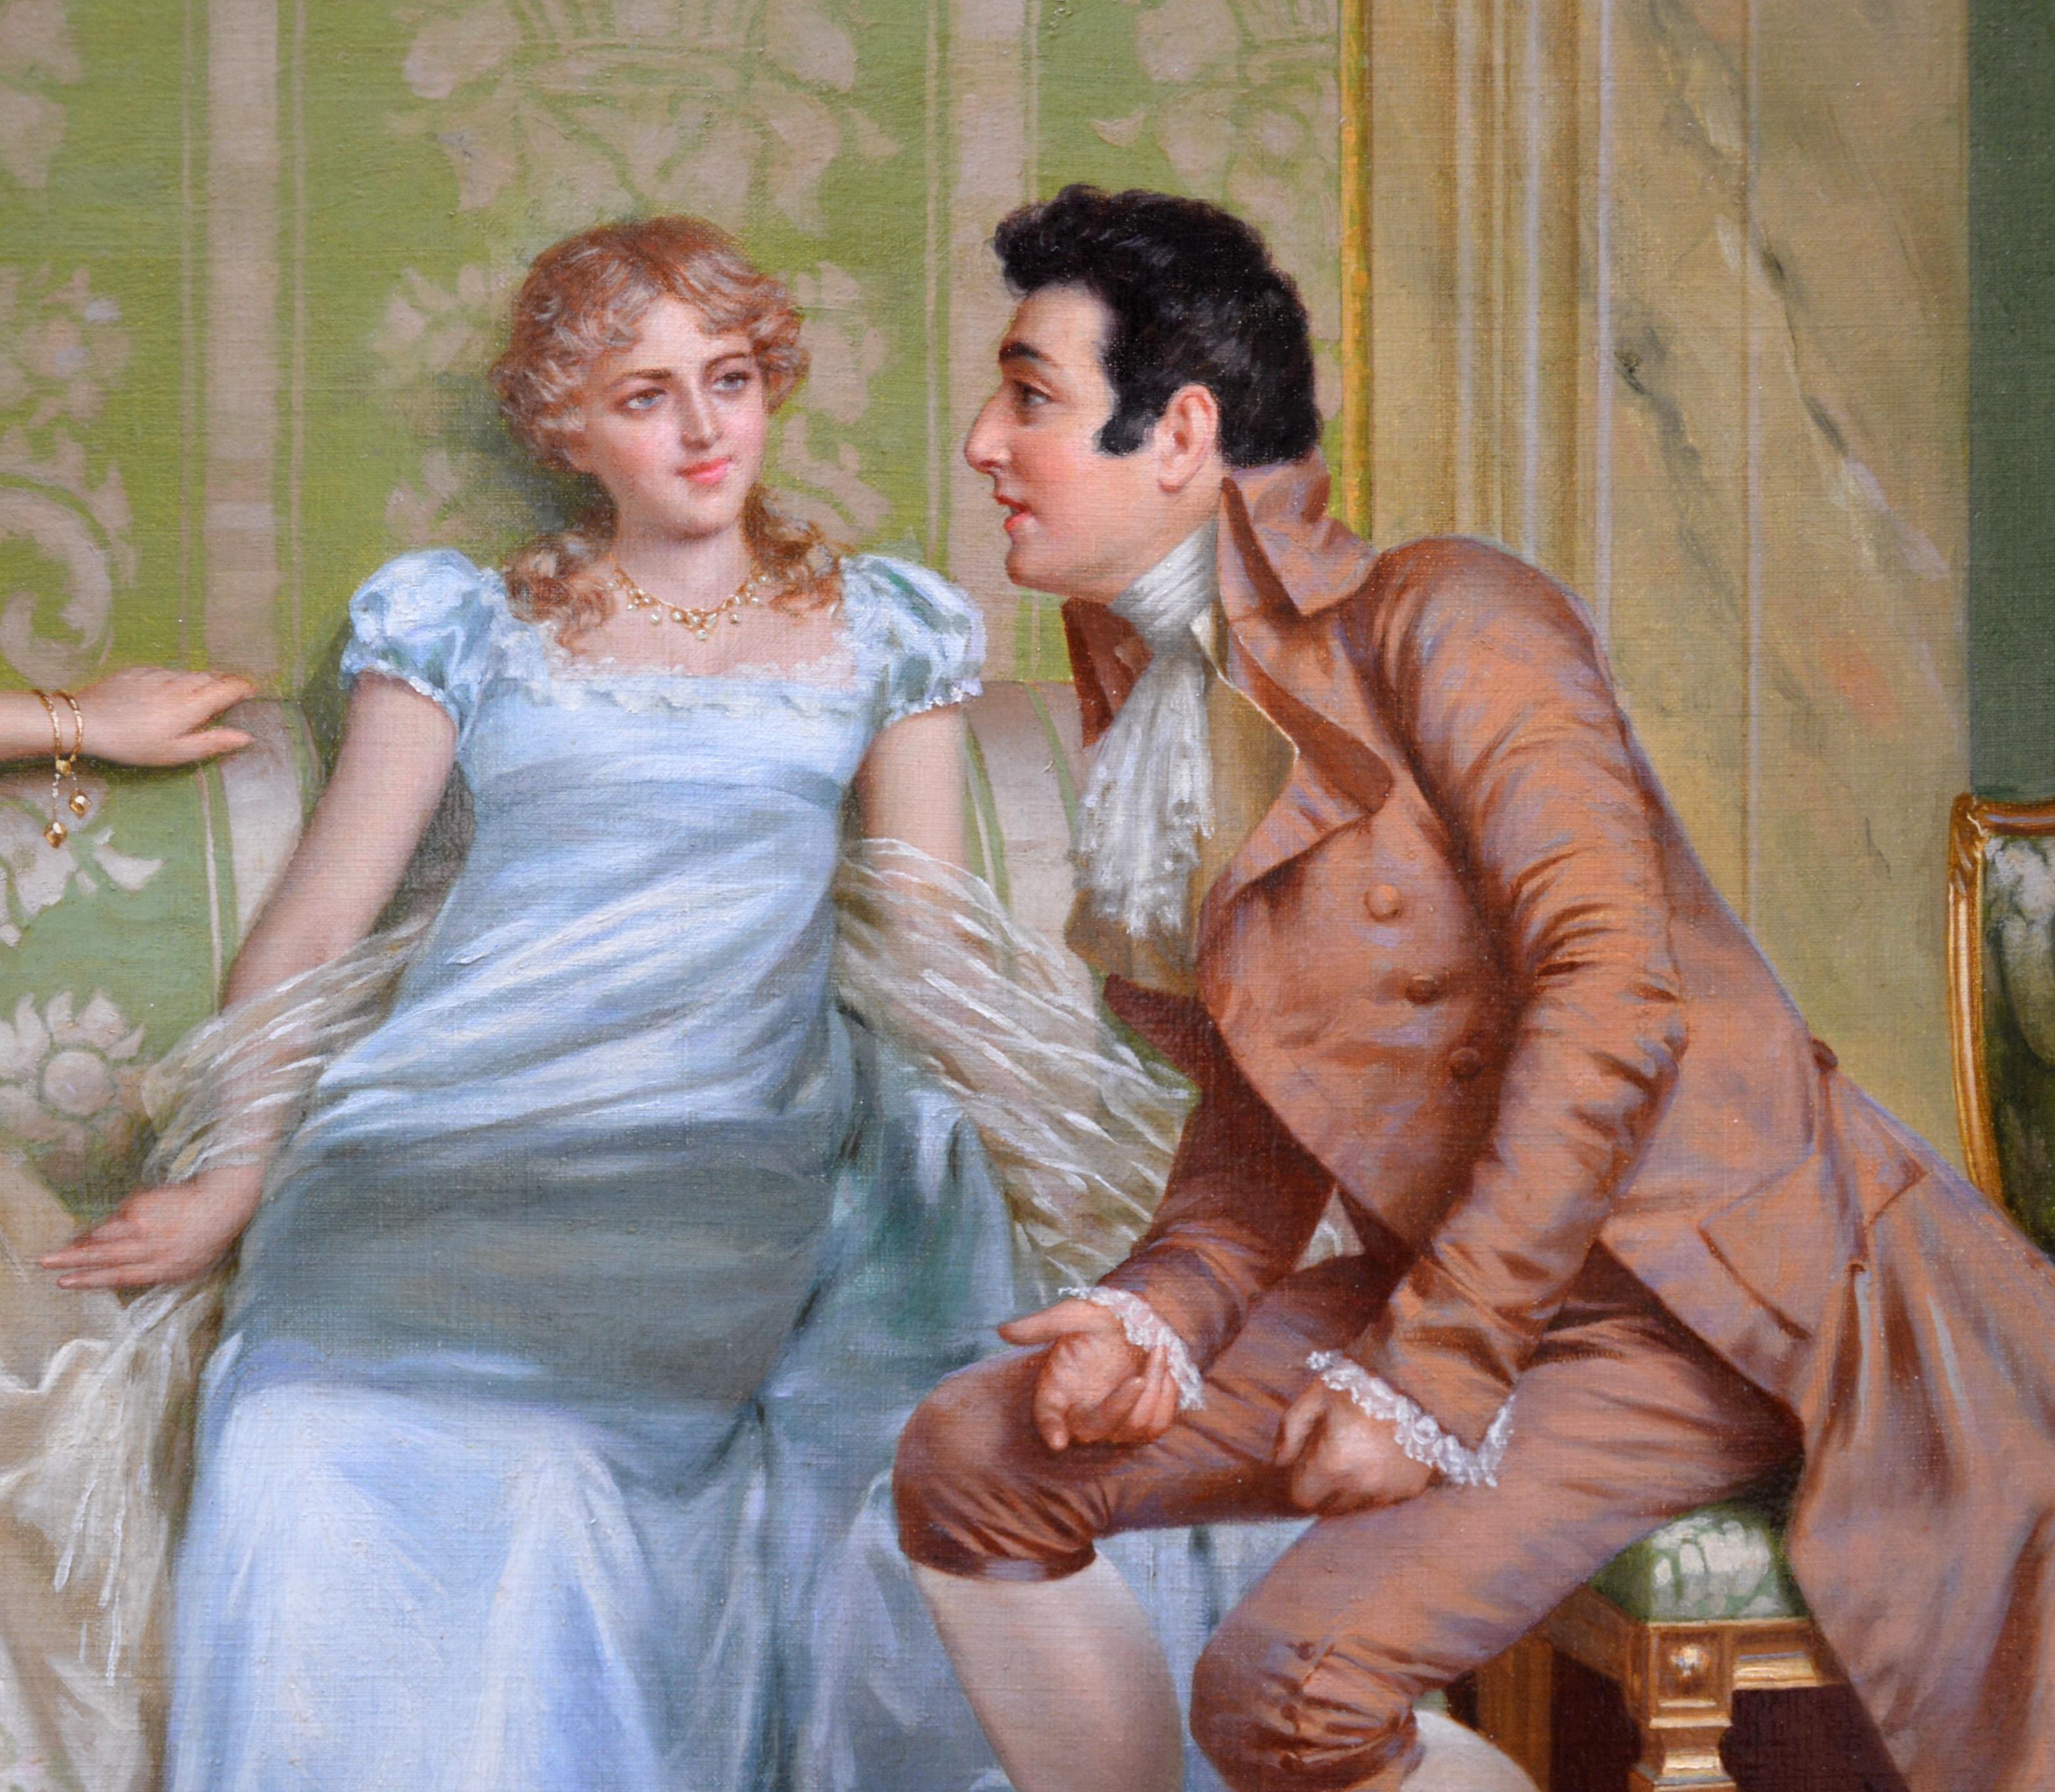 ‘Casanova’ by Vittorio Reggianini (1858-1938).

A large fine 19th century oil on canvas depicting three beautiful young women enjoying the attentions of an enthusiastic young suitor. The painting is signed by the artist and hangs in a superb quality